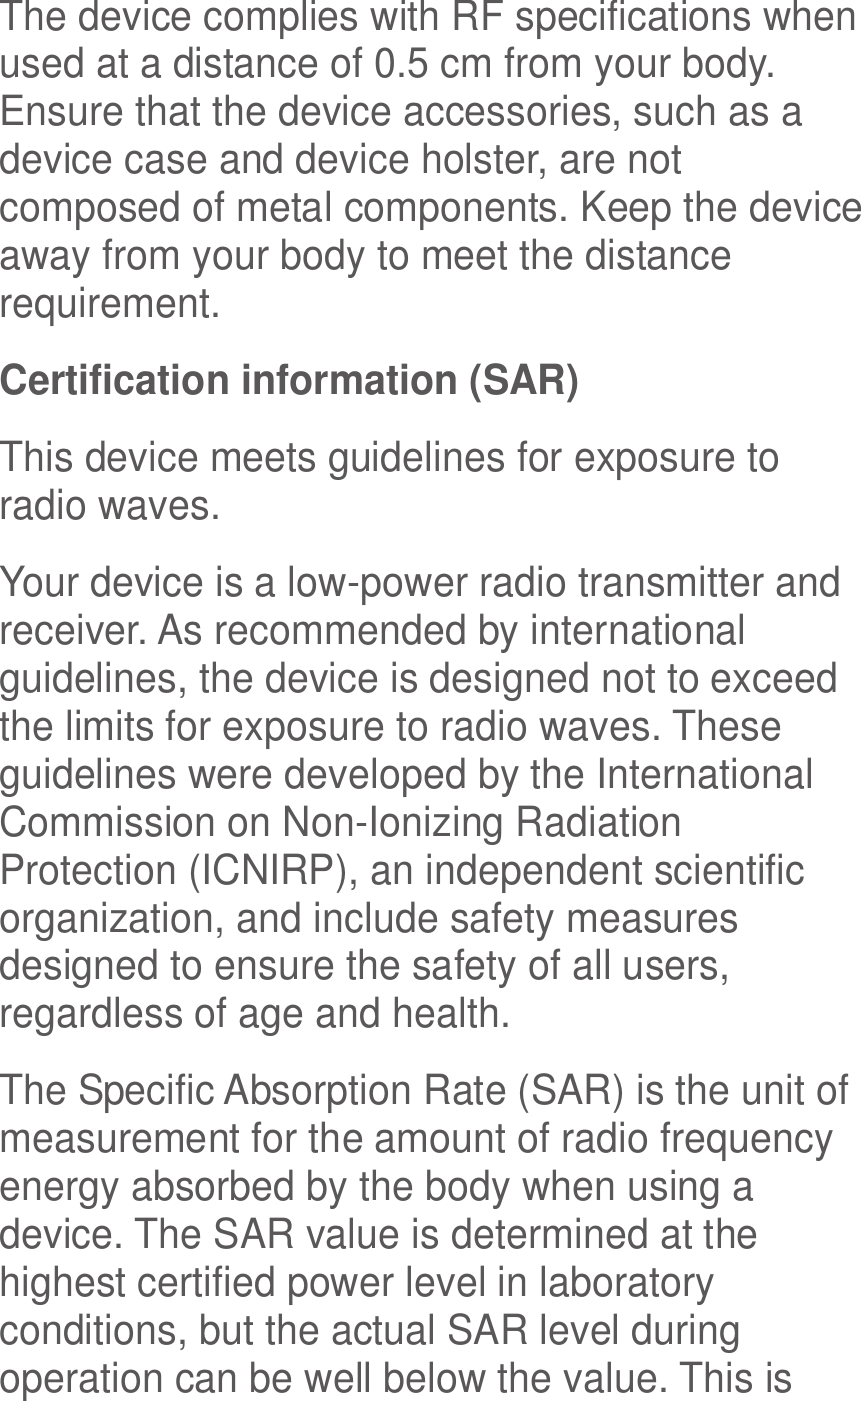  The device complies with RF specifications when used at a distance of 0.5 cm from your body. Ensure that the device accessories, such as a device case and device holster, are not composed of metal components. Keep the device away from your body to meet the distance requirement. Certification information (SAR) This device meets guidelines for exposure to radio waves. Your device is a low-power radio transmitter and receiver. As recommended by international guidelines, the device is designed not to exceed the limits for exposure to radio waves. These guidelines were developed by the International Commission on Non-Ionizing Radiation Protection (ICNIRP), an independent scientific organization, and include safety measures designed to ensure the safety of all users, regardless of age and health. The Specific Absorption Rate (SAR) is the unit of measurement for the amount of radio frequency energy absorbed by the body when using a device. The SAR value is determined at the highest certified power level in laboratory conditions, but the actual SAR level during operation can be well below the value. This is 